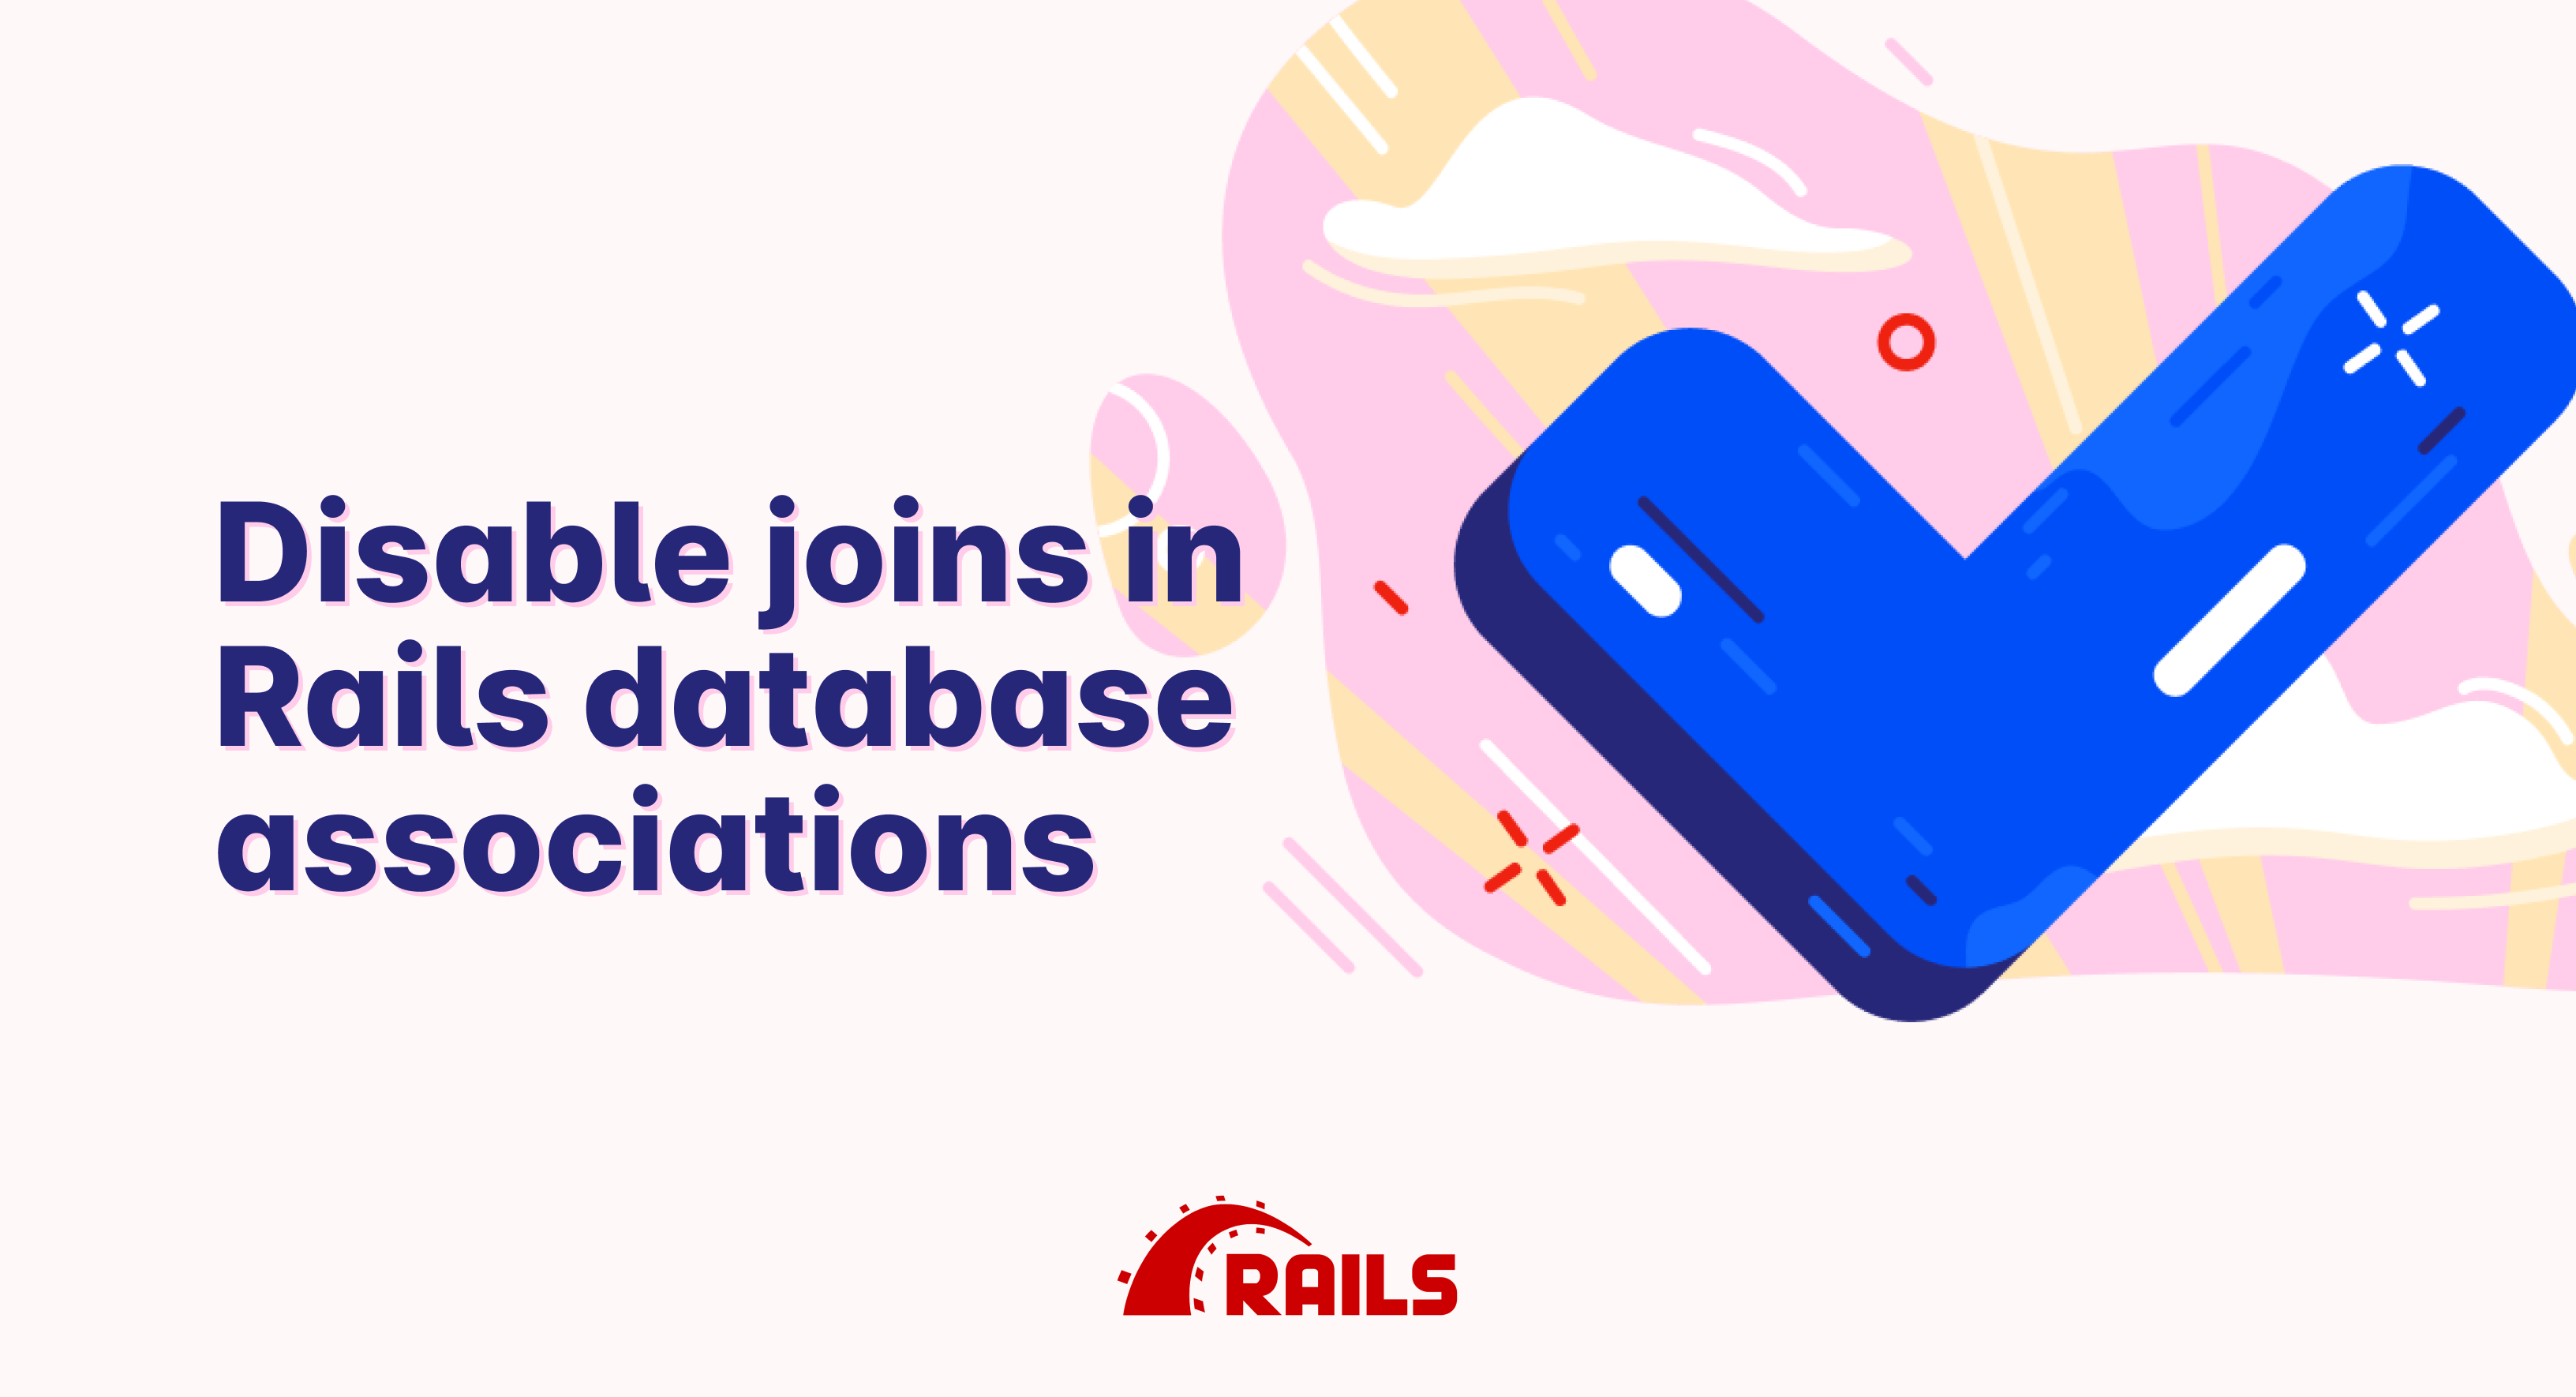 Now you can disable joins in Rails database associations